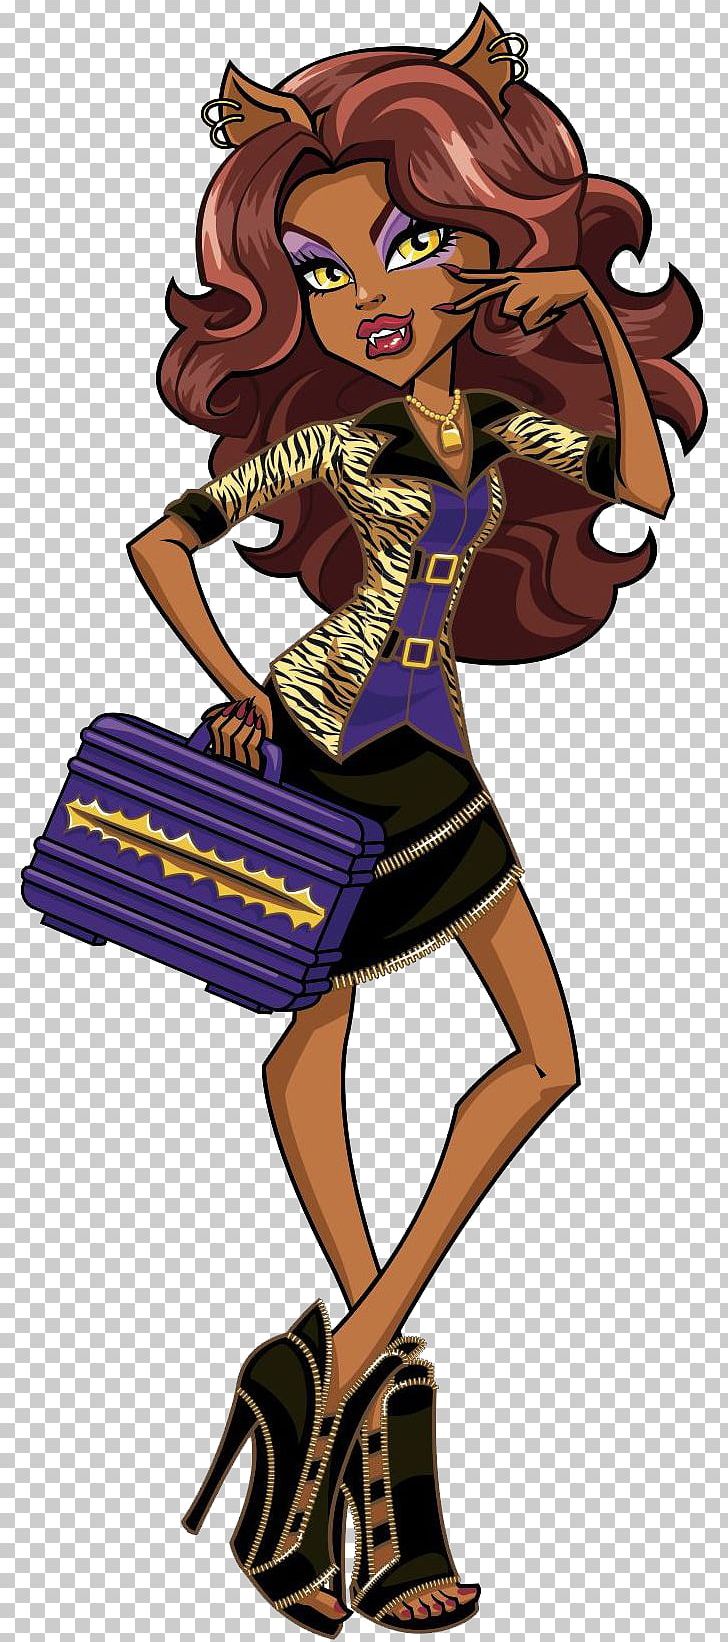 Monster High: Ghoul Spirit Doll Frankie Stein Gray Wolf PNG, Clipart, Art, Cartoon, Costume Design, Doll, Fiction Free PNG Download